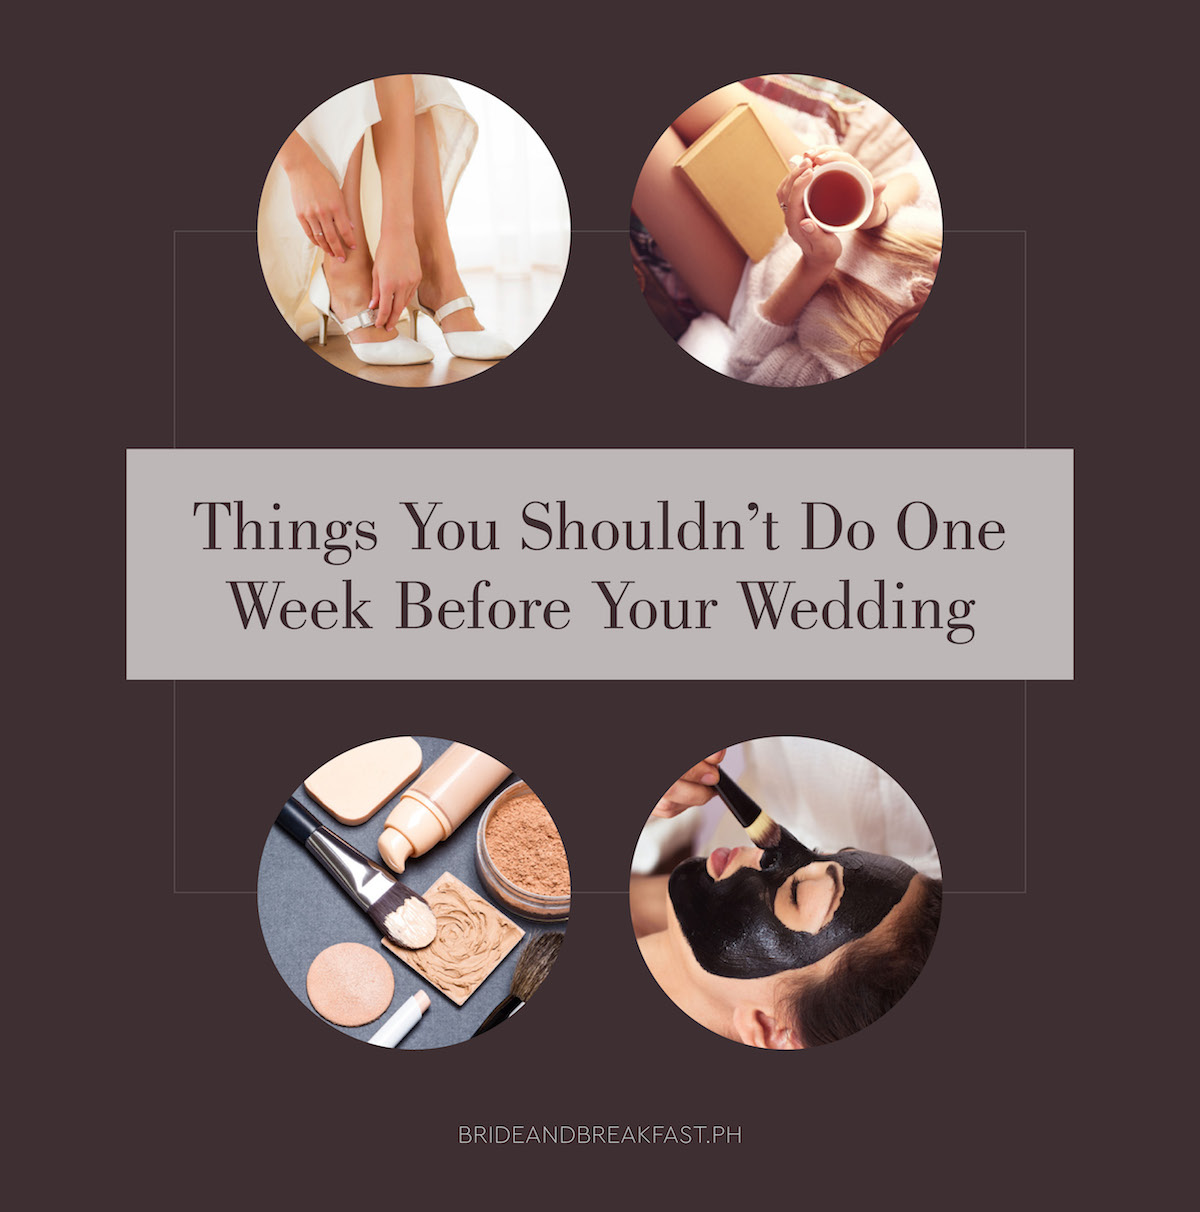 Things You Shouldn't Do One Week Before Your Wedding